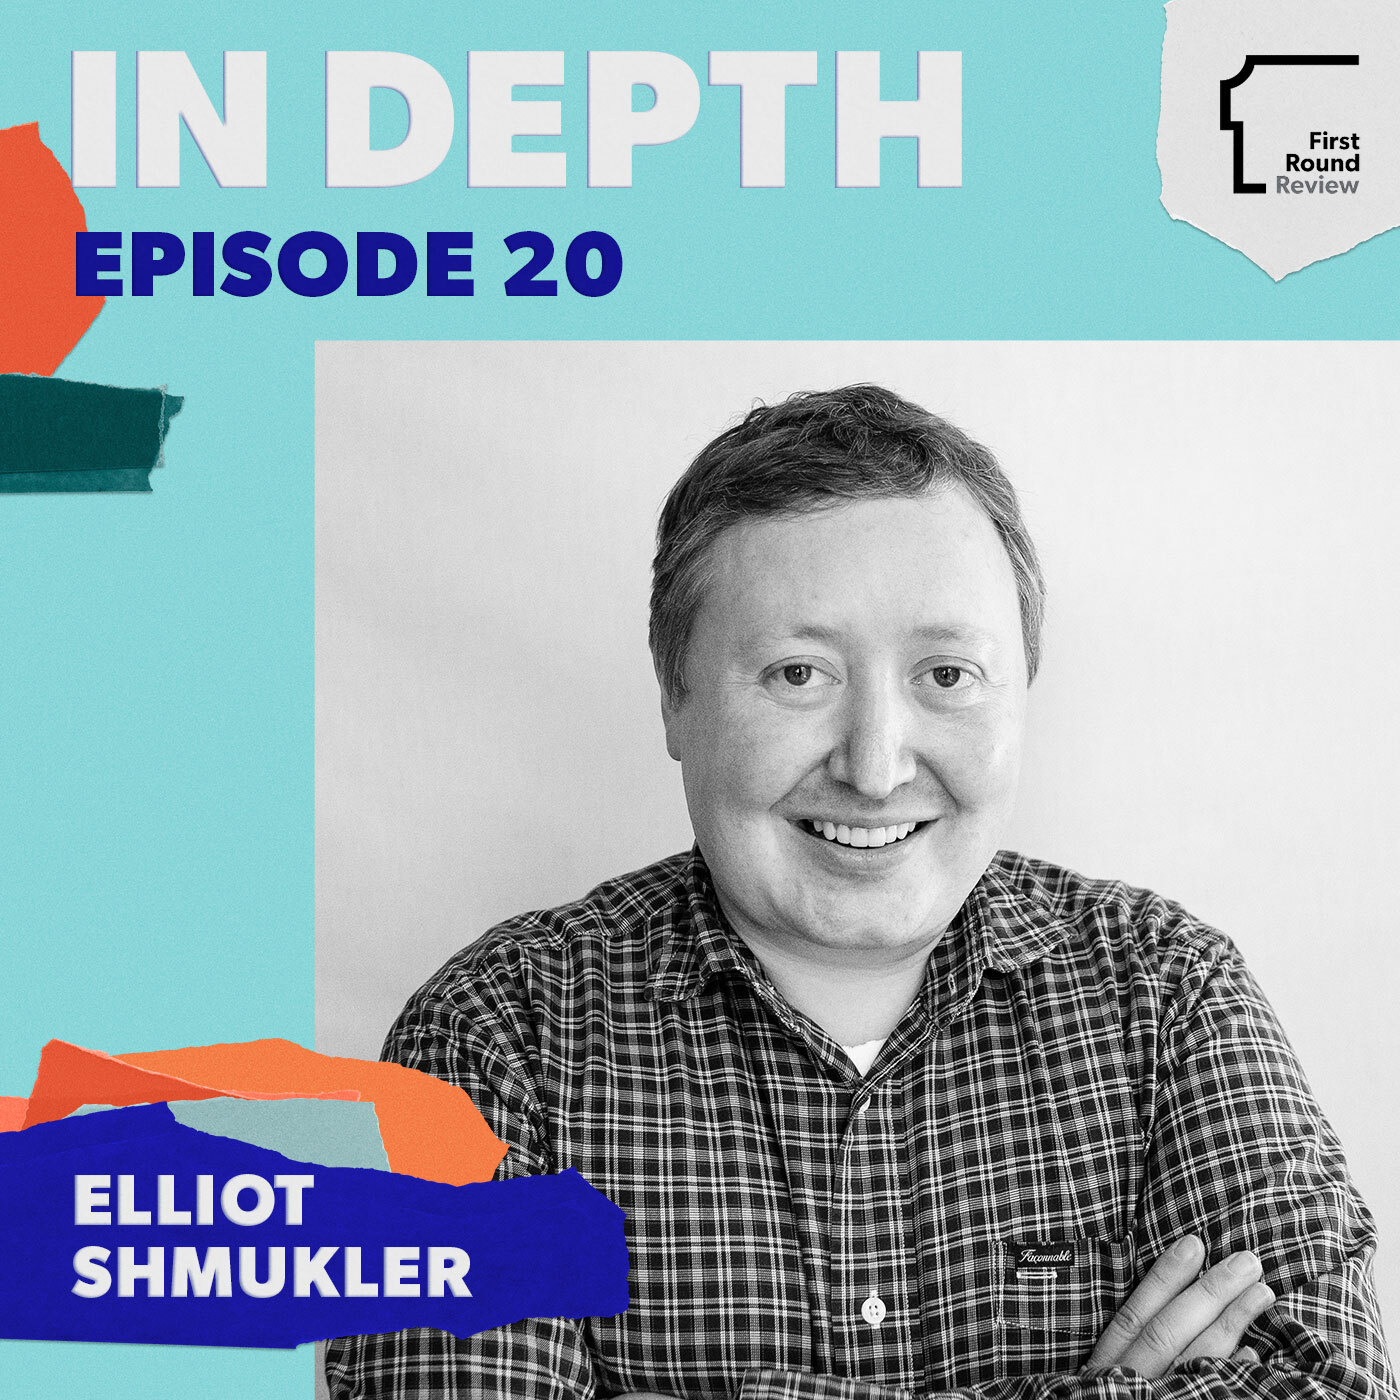 After leading product & growth teams at Instacart, Wealthfront & LinkedIn, Elliot Shmukler is tackling zero to one as founder & CEO of Anomalo